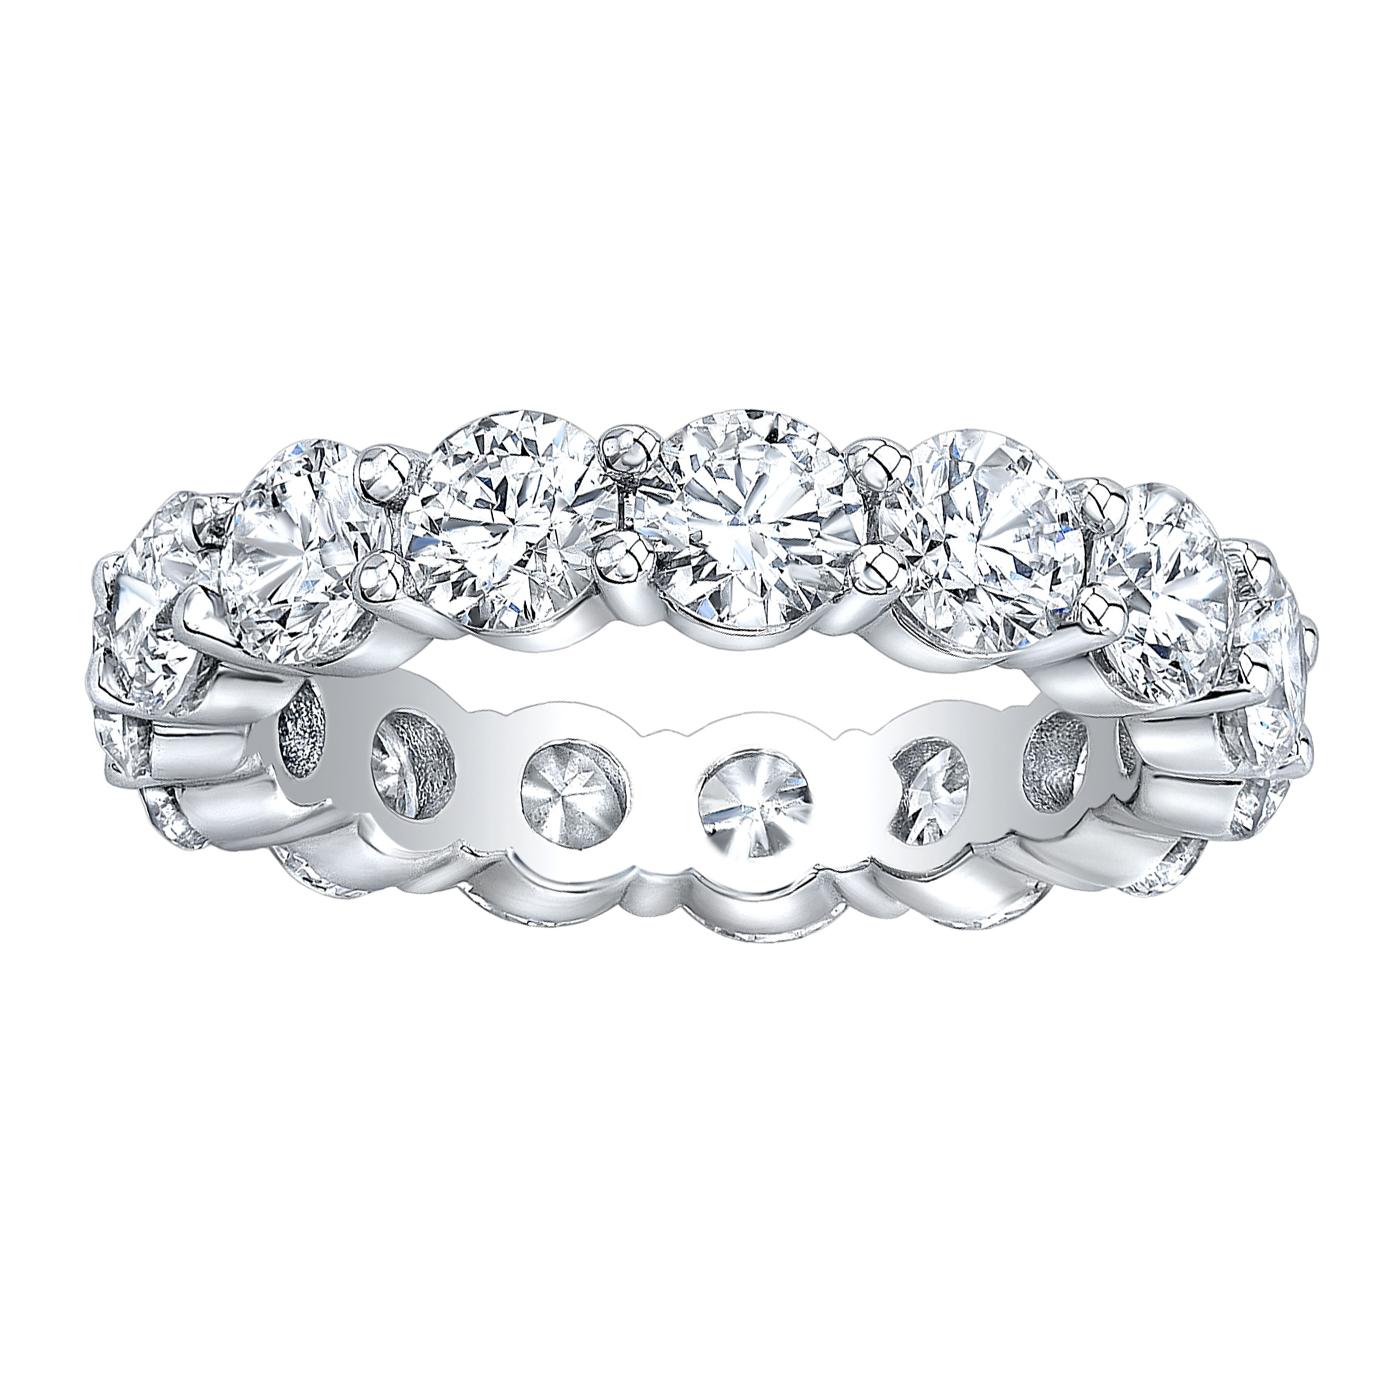 Round Cut 2.5ct 18 Natural Round Diamond Eternity Band Wedding Ring Platinum VS1 Clarity For Sale